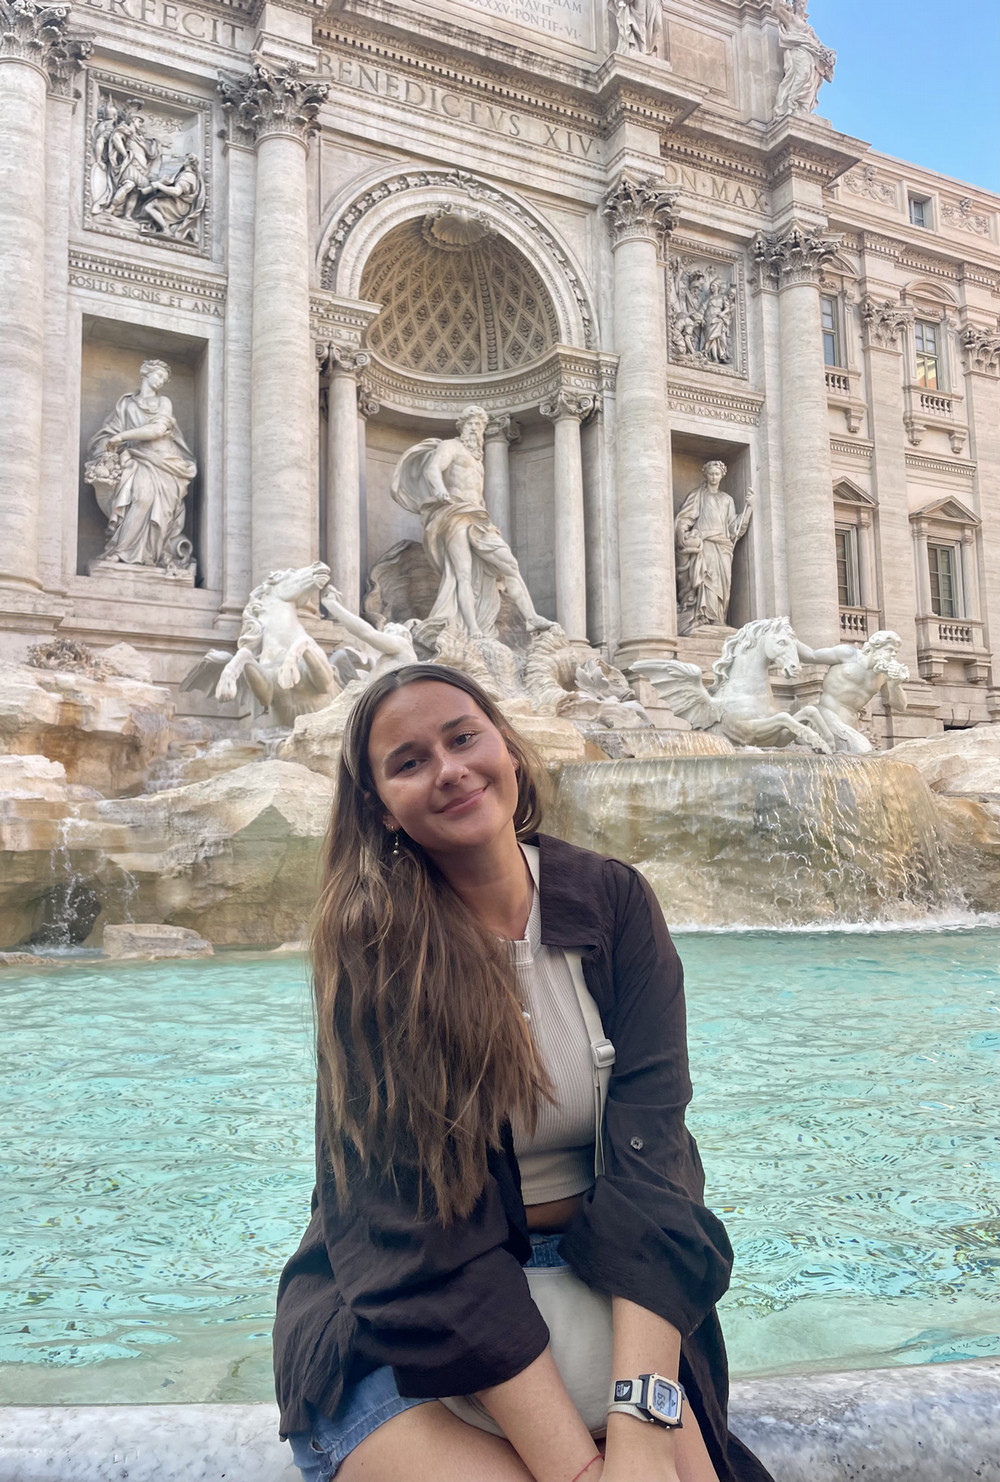 A smiling female student sits in front of a large marble fountain with elaborate sculptures and bright blue water in Italy.